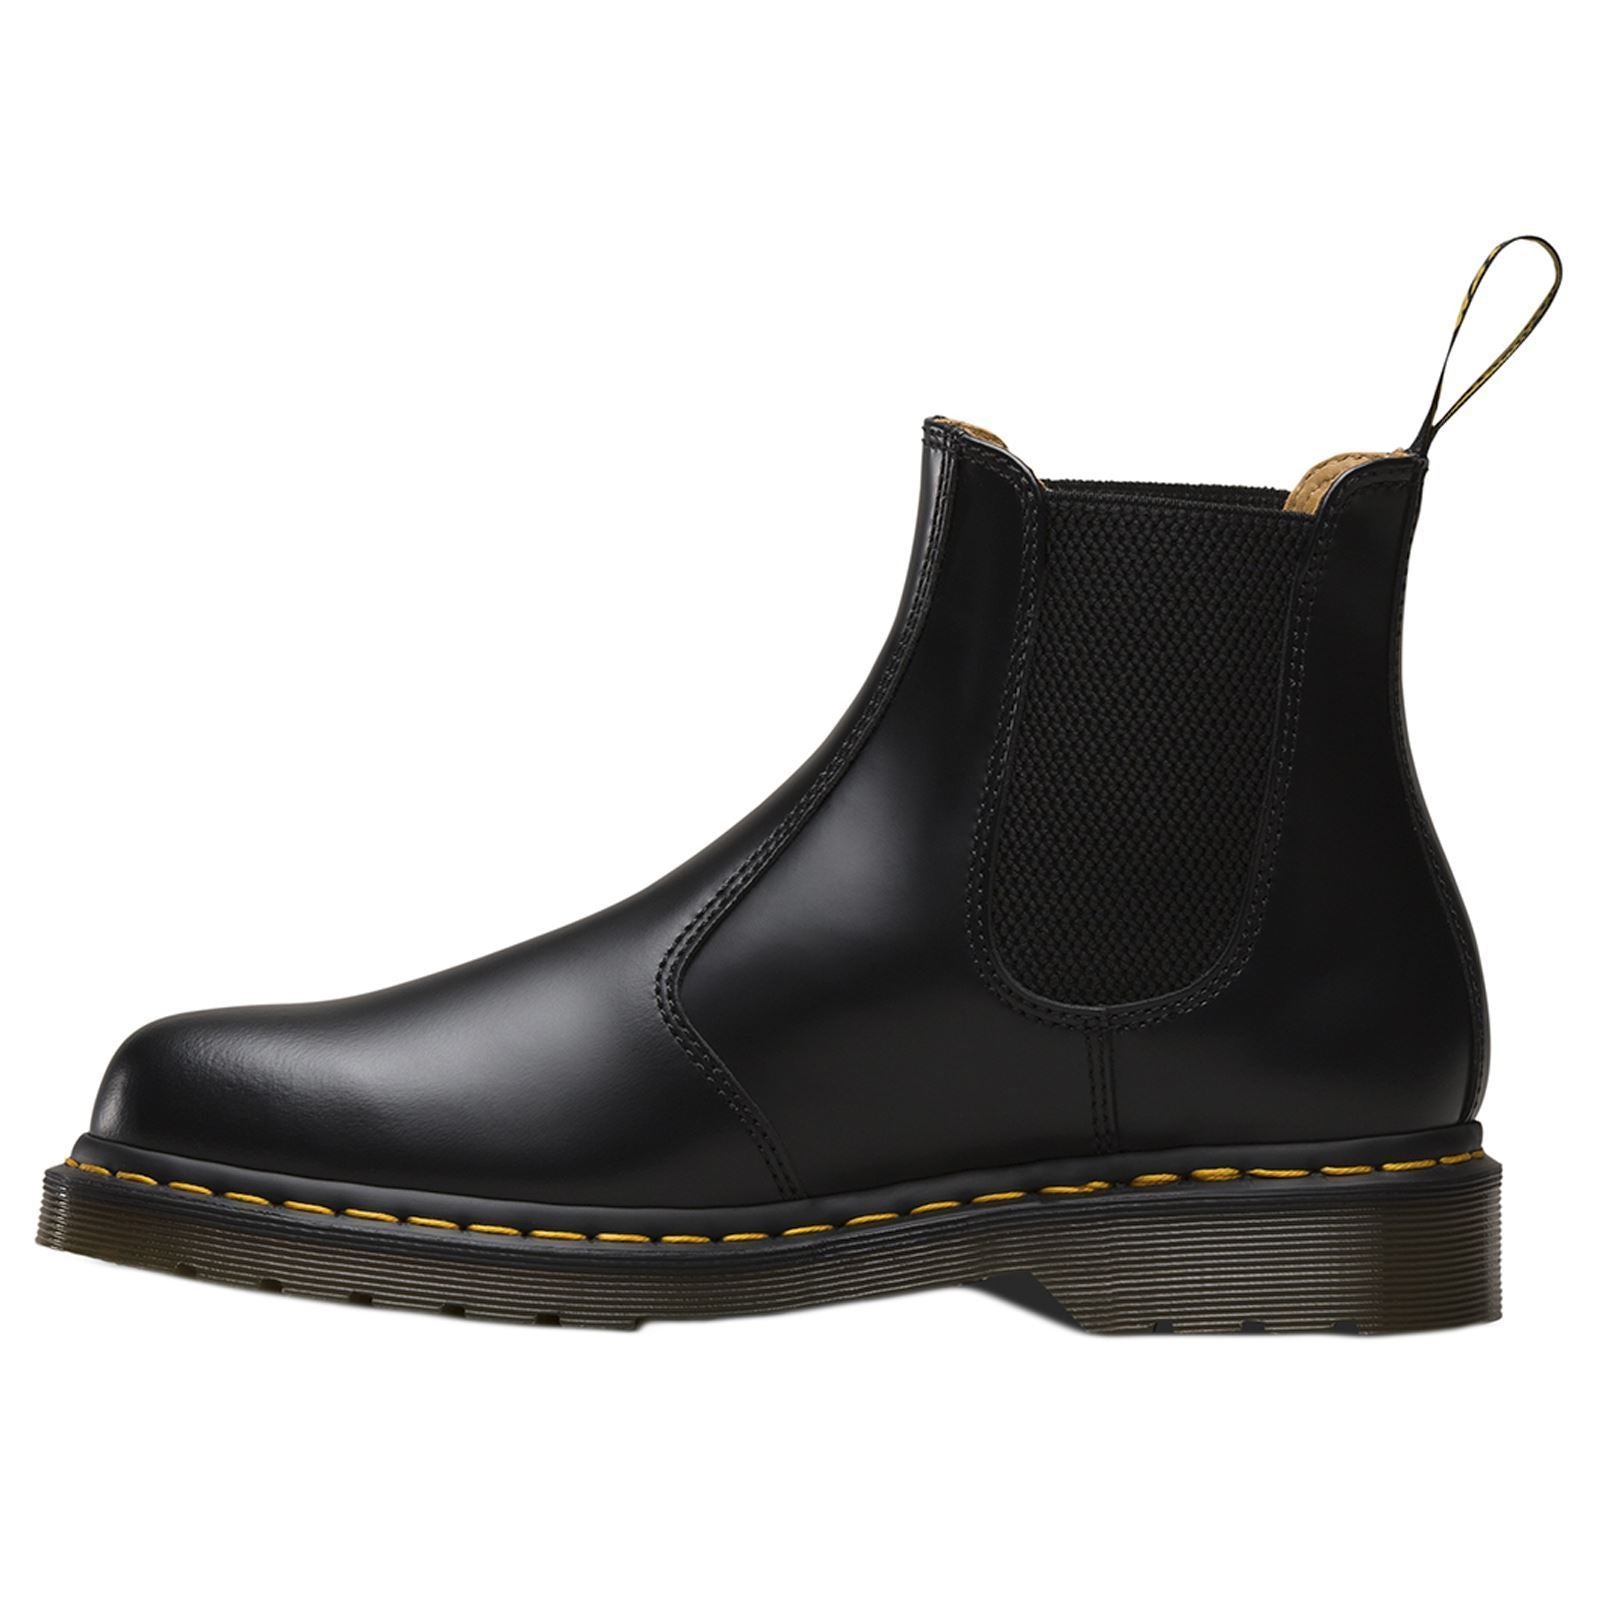 Dr. Martens 2976 Smooth Leather Unisex Chelsea Boots